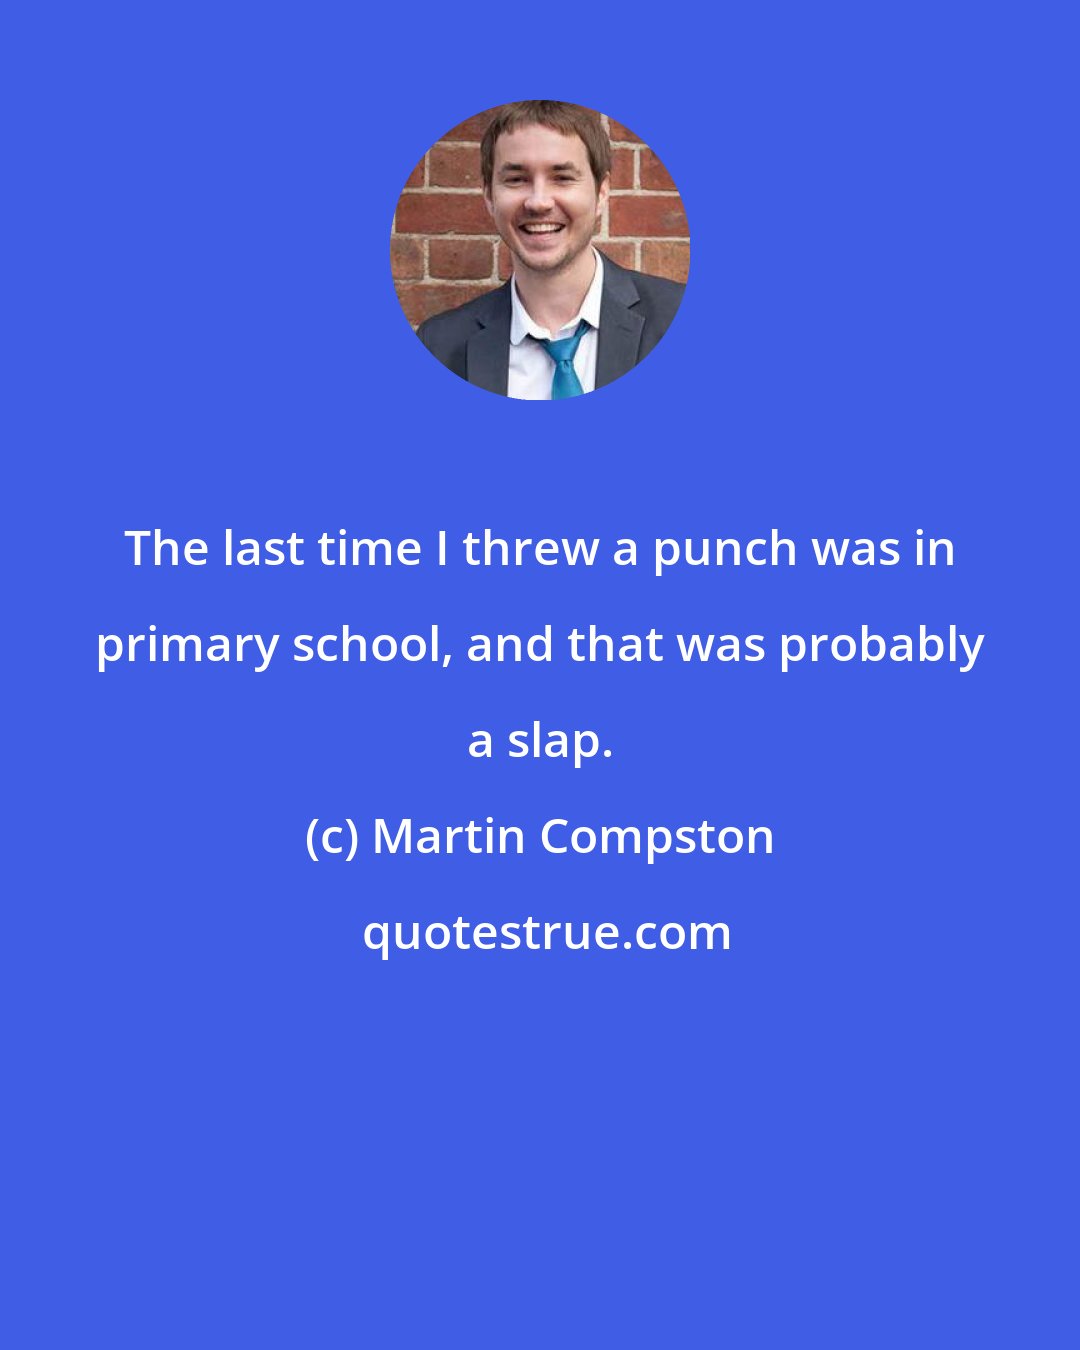 Martin Compston: The last time I threw a punch was in primary school, and that was probably a slap.